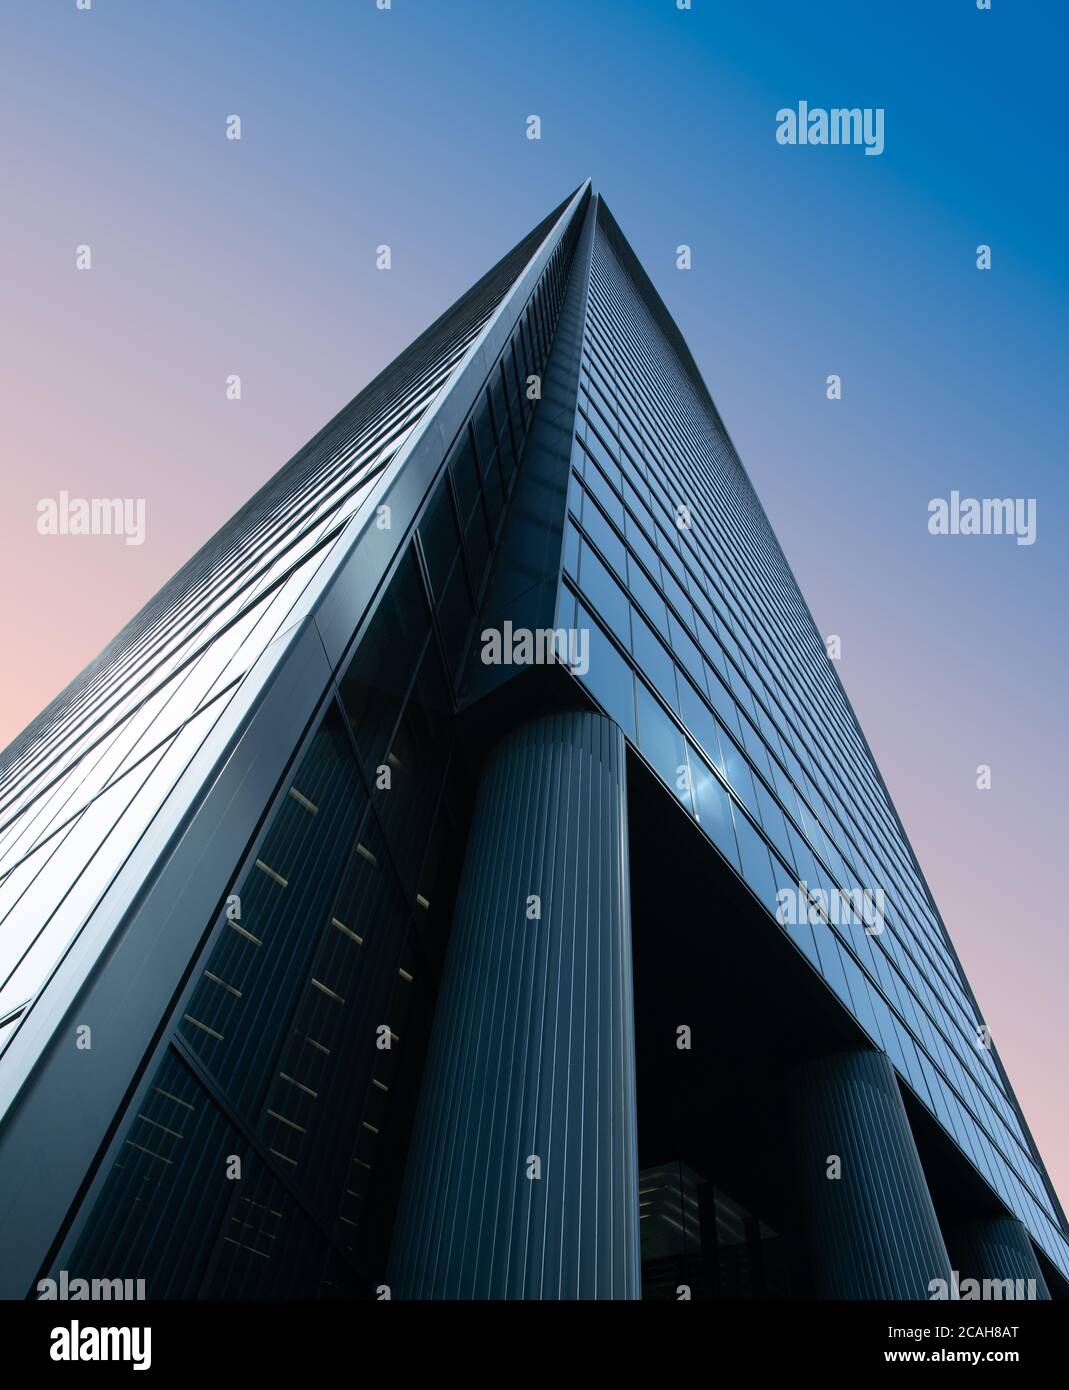 Low angle view of a business office building against pink and blue sky Stock Photo